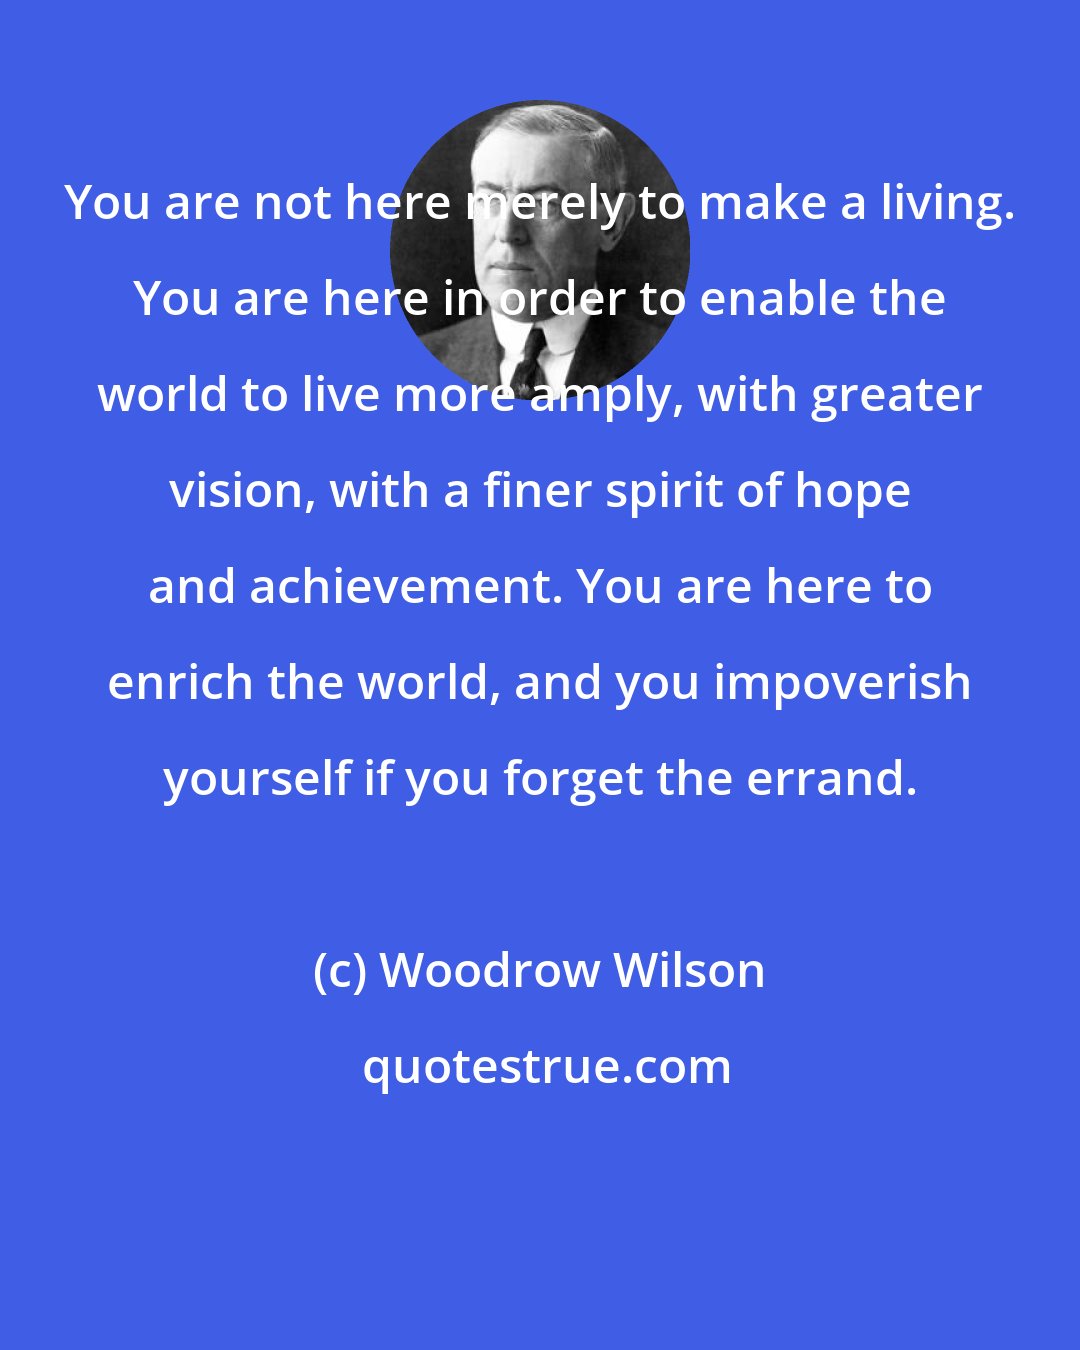 Woodrow Wilson: You are not here merely to make a living. You are here in order to enable the world to live more amply, with greater vision, with a finer spirit of hope and achievement. You are here to enrich the world, and you impoverish yourself if you forget the errand.